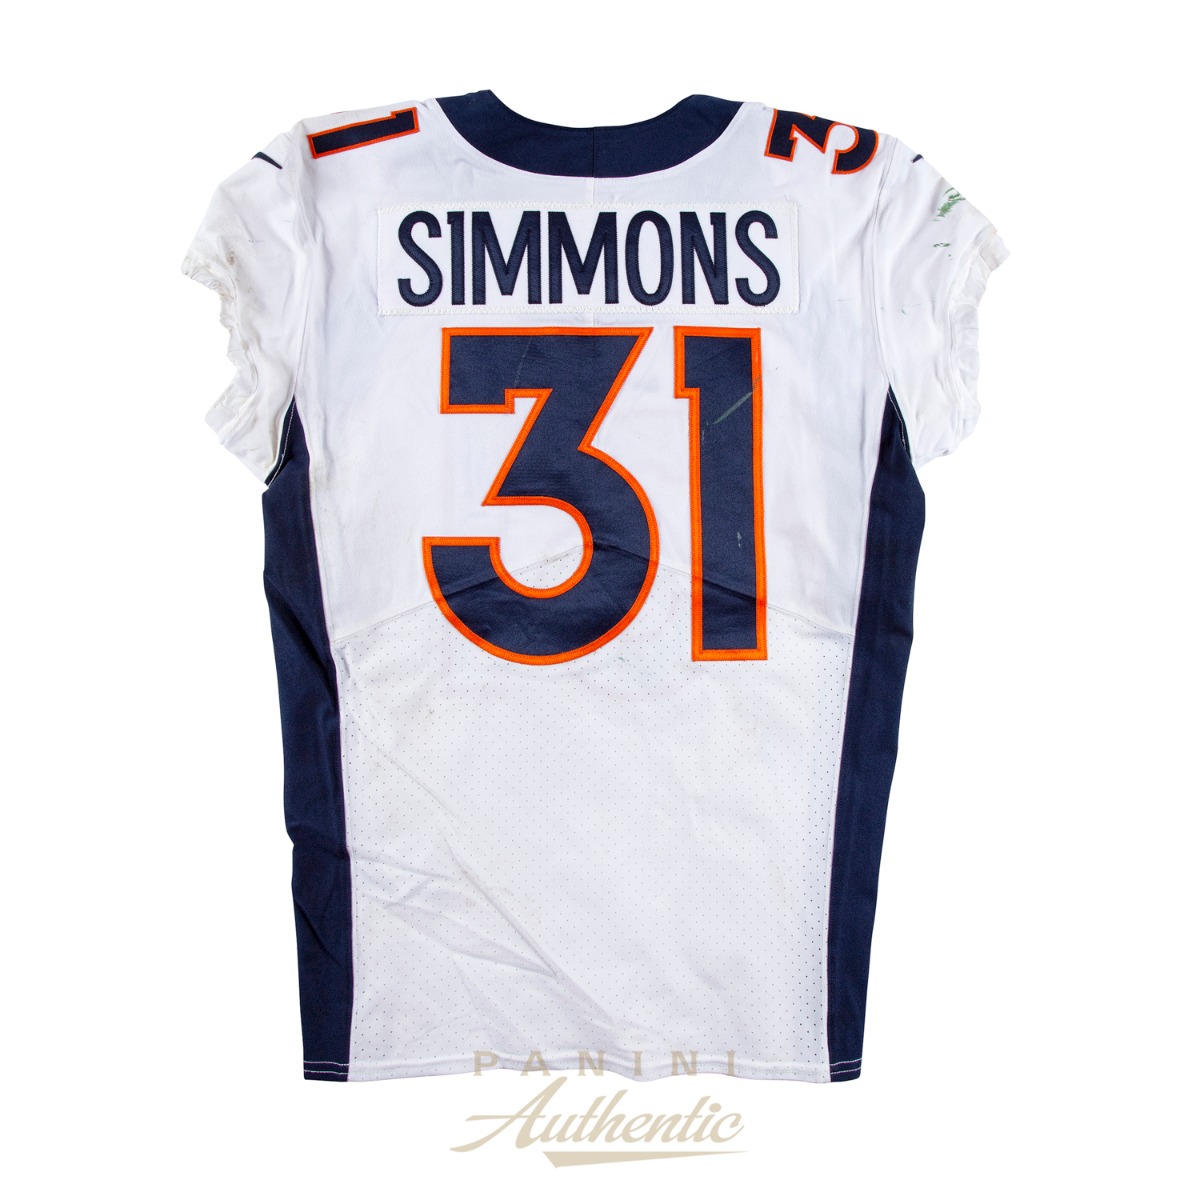 justin simmons stitched jersey